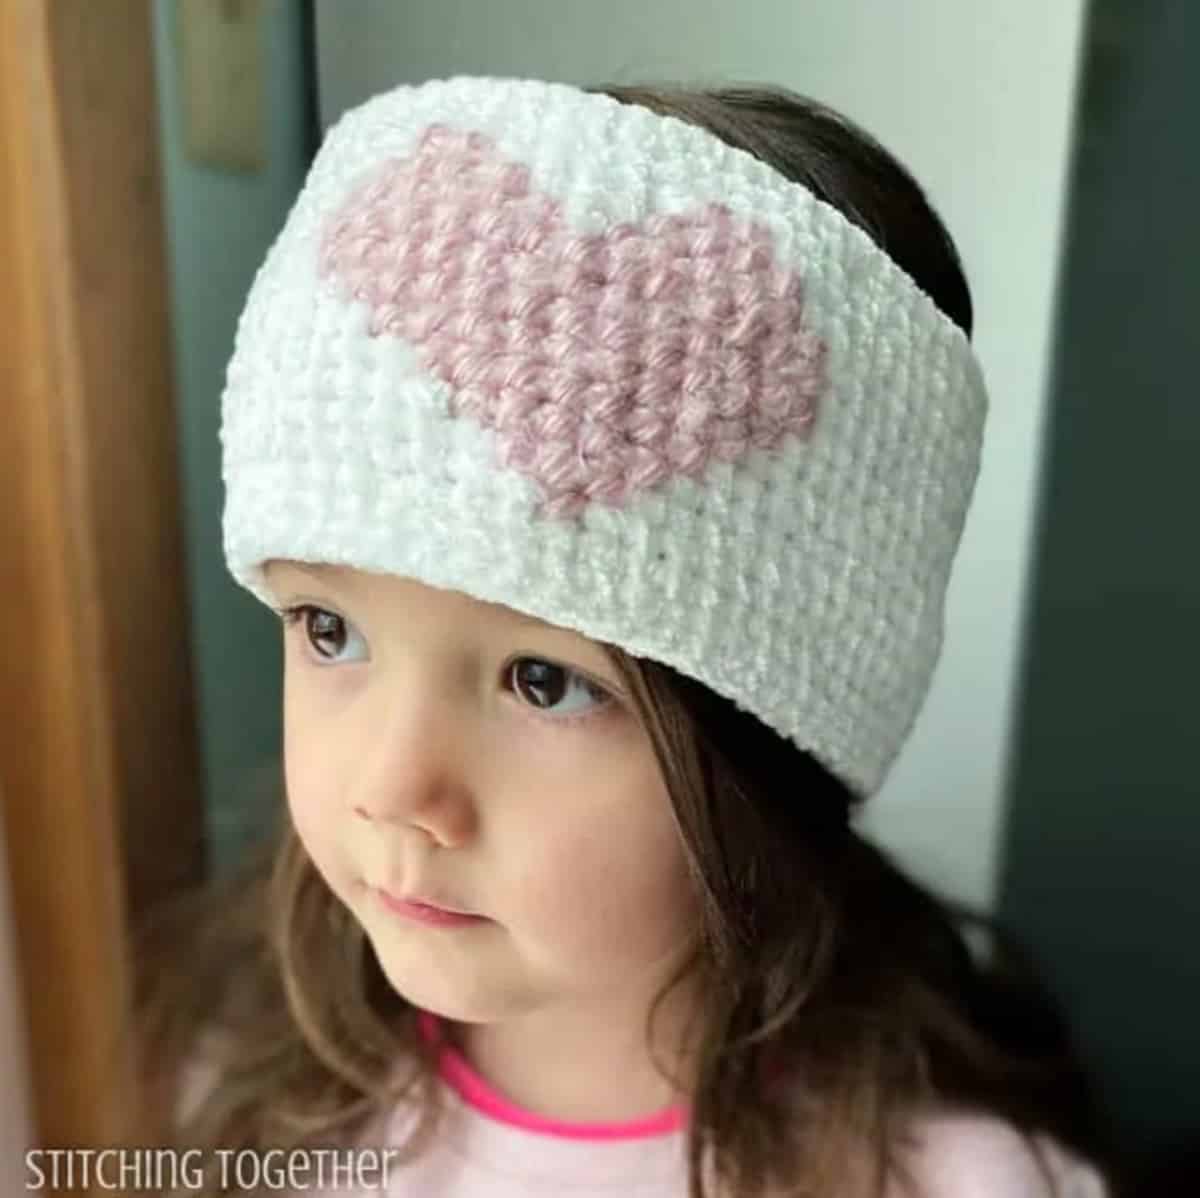 Crochet head warmer with large pink heart.